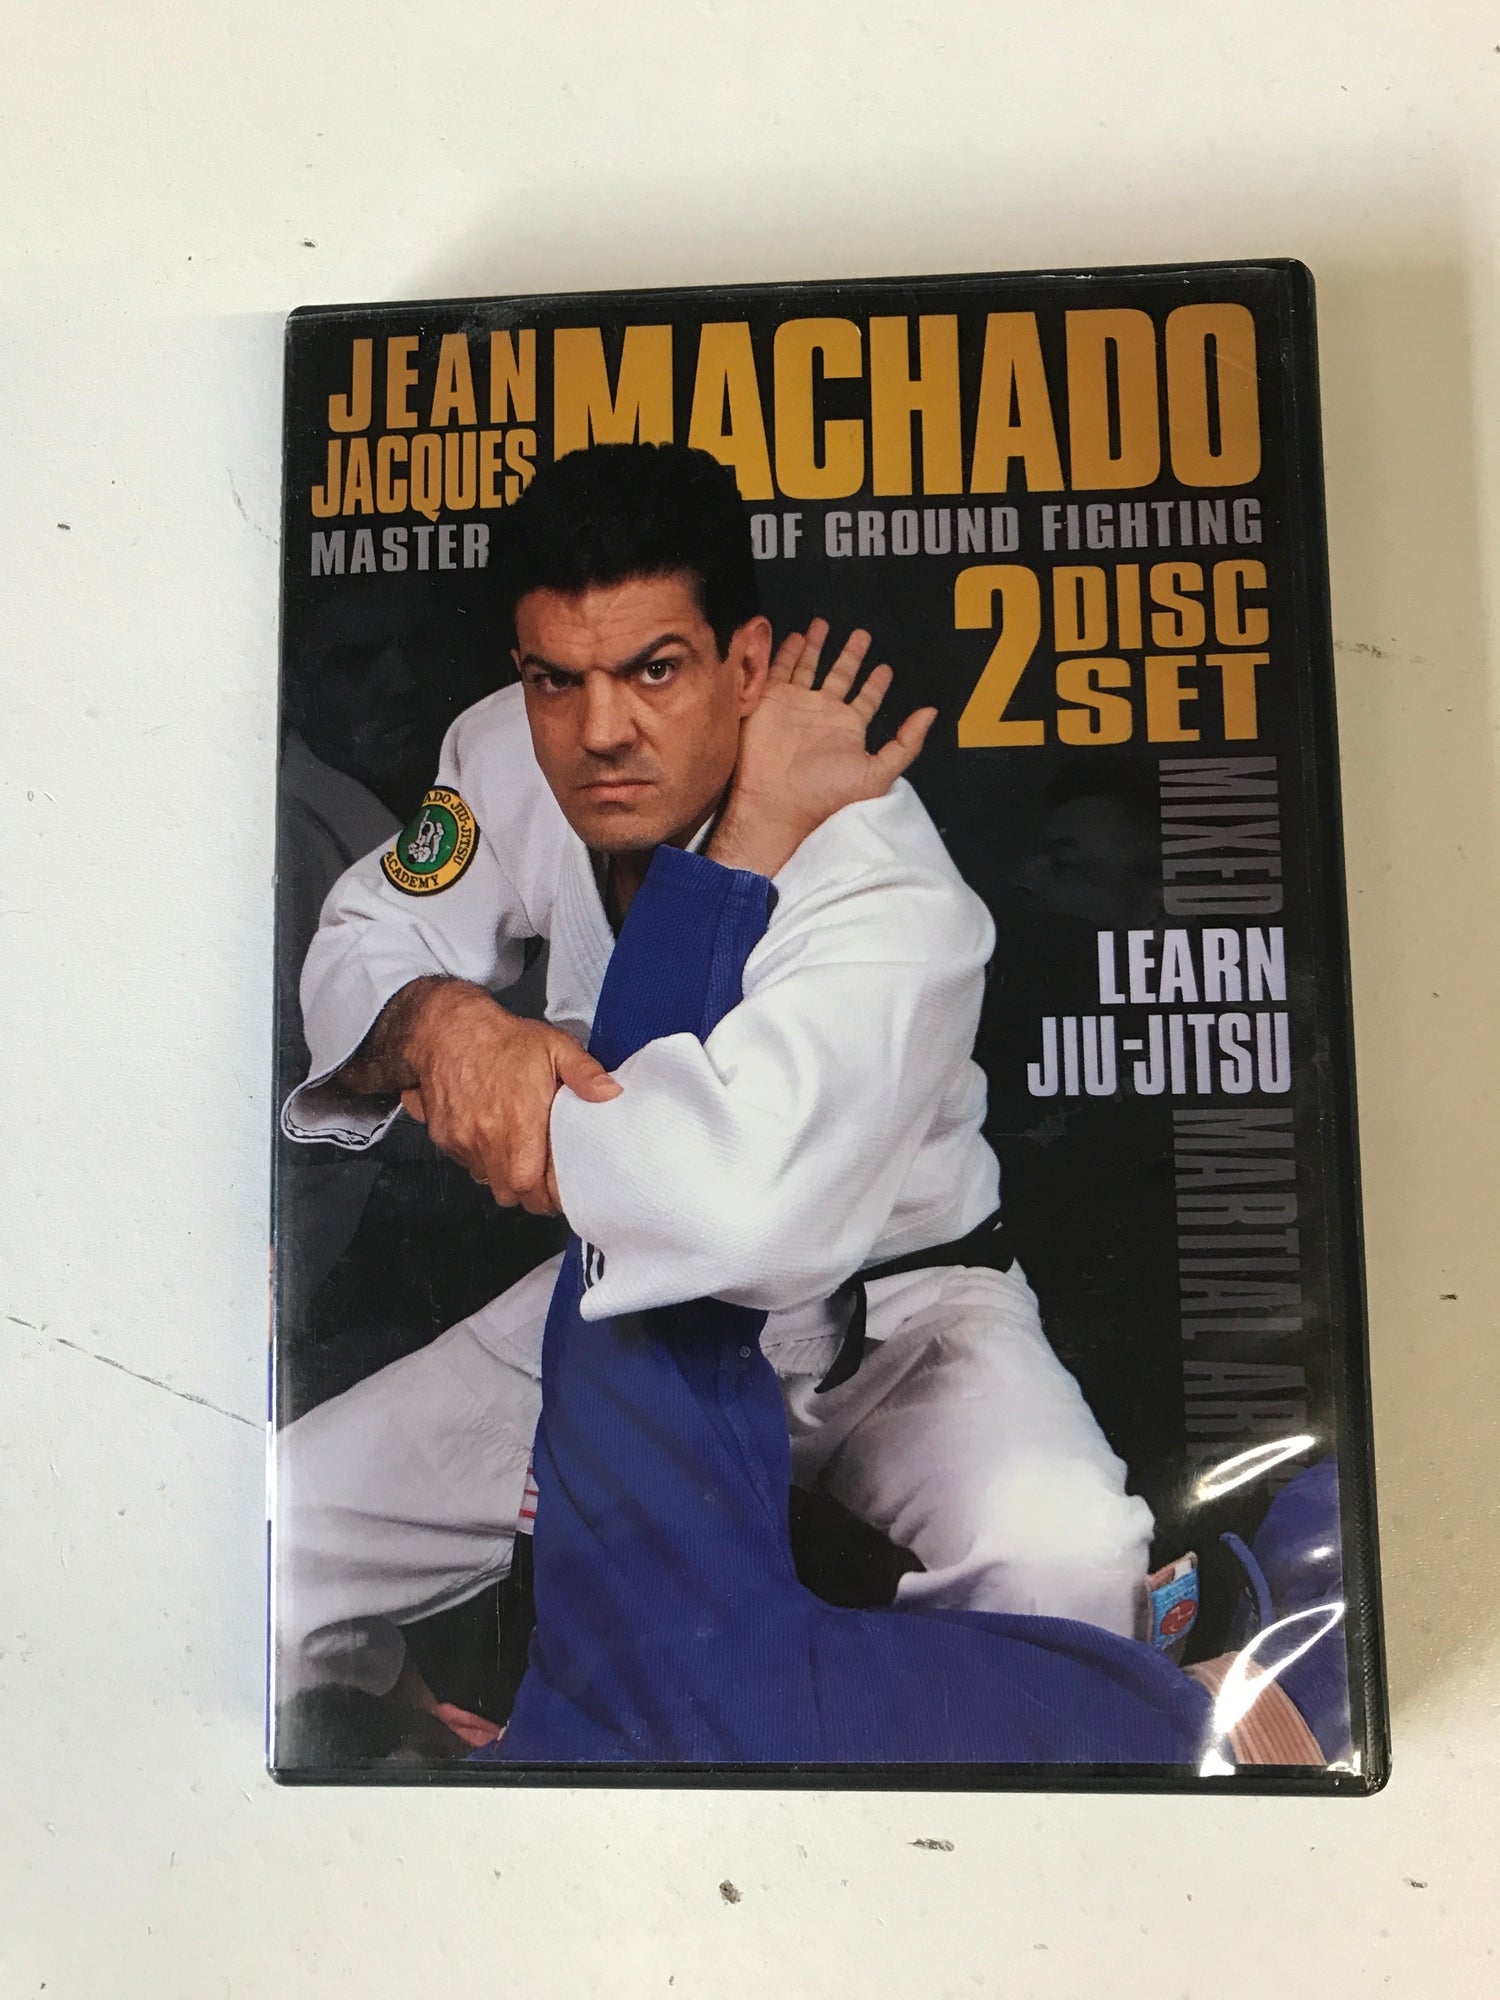 Master of Ground Fighting 2 DVD Set by Jean Jacques Machado - Budovideos Inc